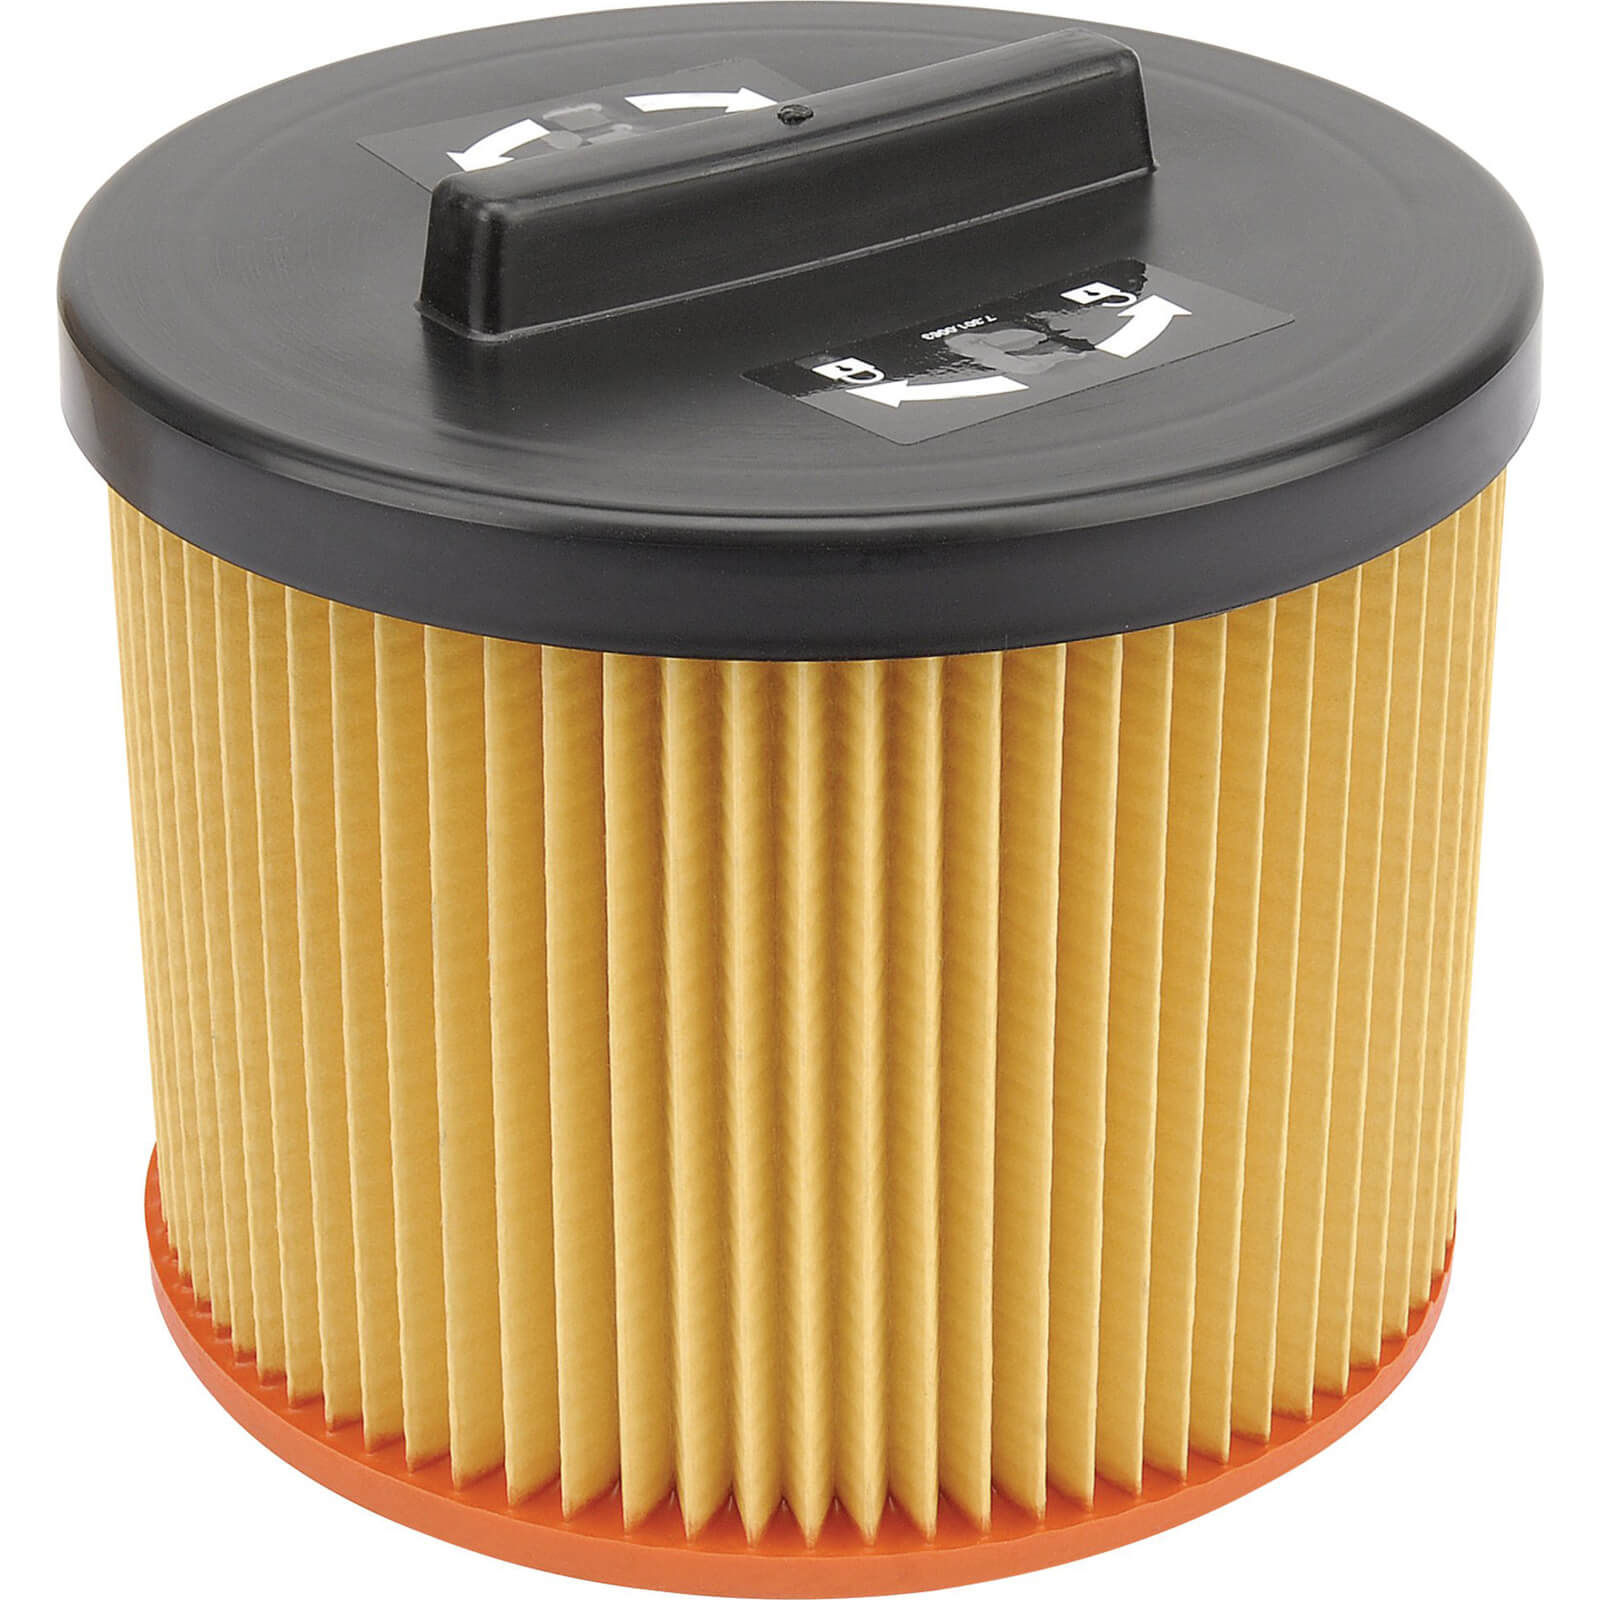 Image of Draper Cartridge Filter for WDV50SS and WDV50SS/110 Vacuum Cleaners